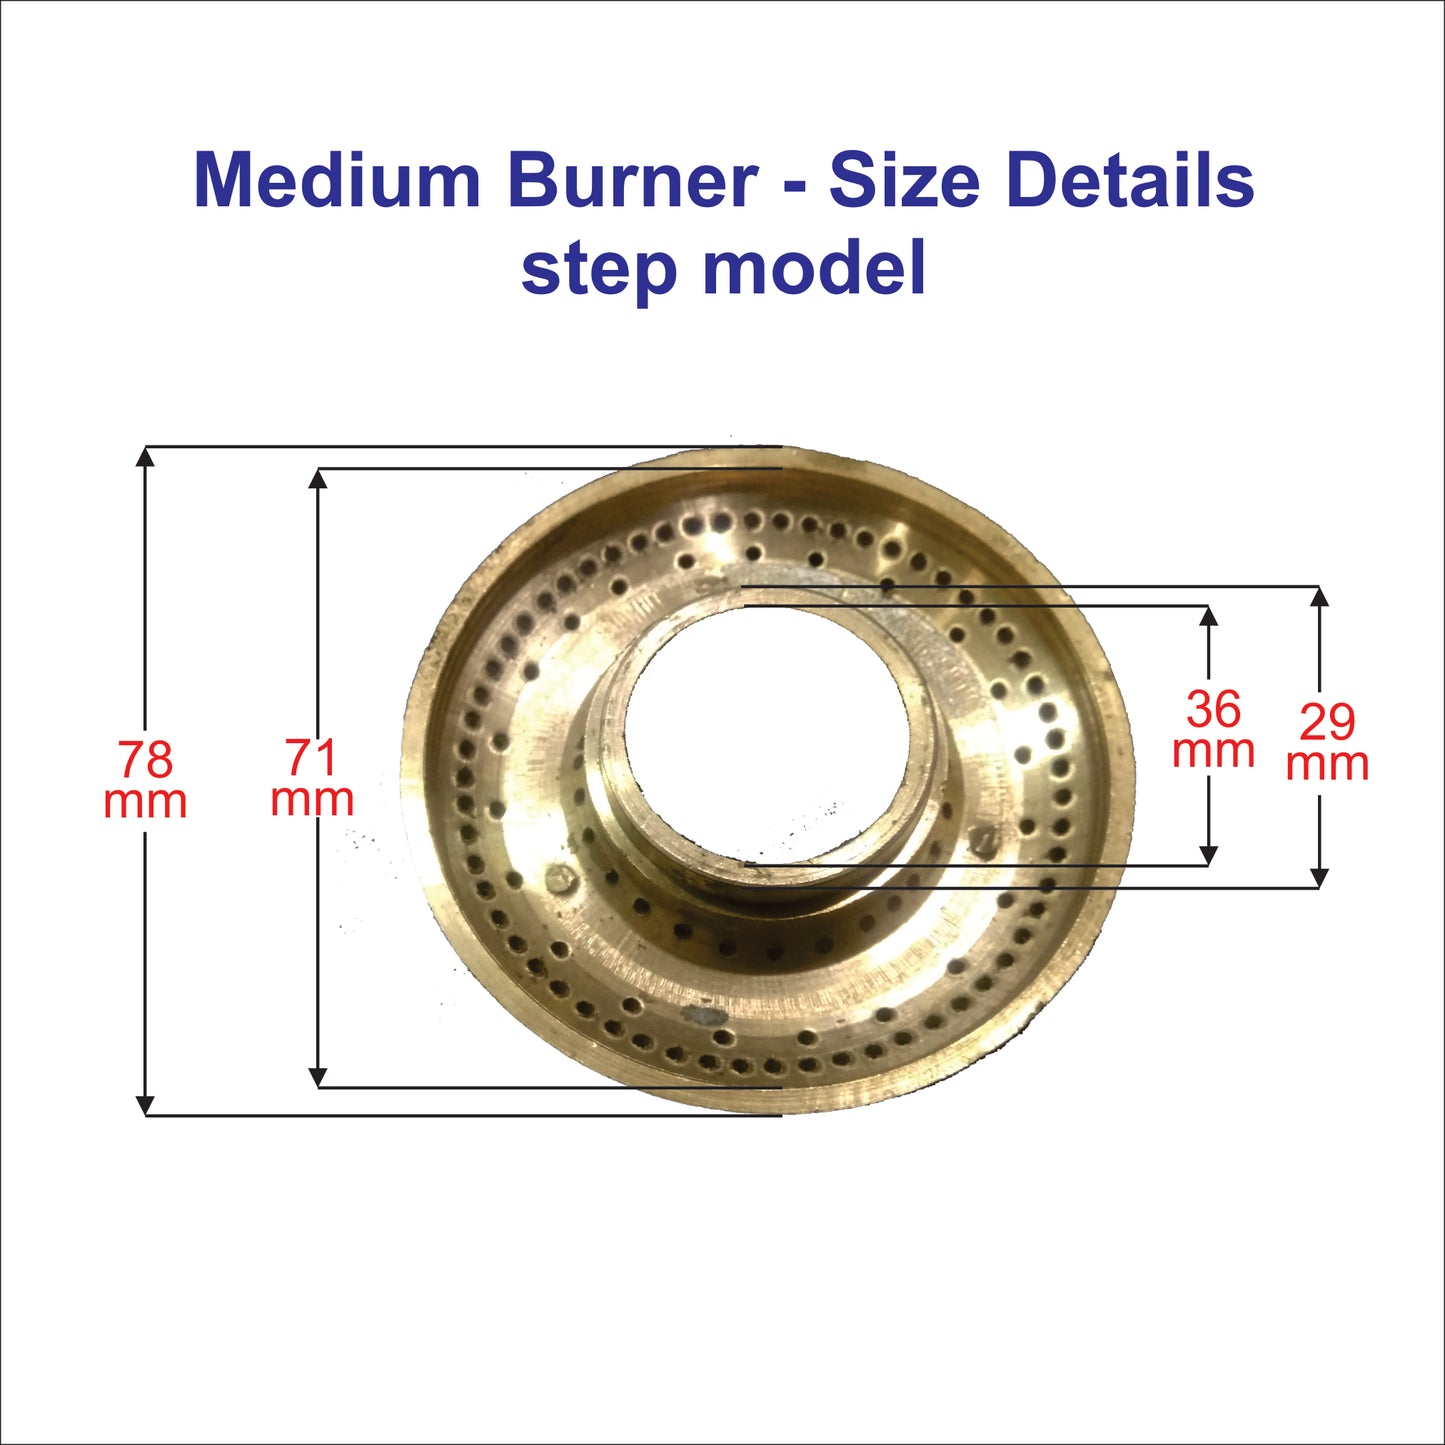 4 nos Gas stove Burner suitable for Prestige Gas Stove (only 4 Burners not Full Stove) 2S2M